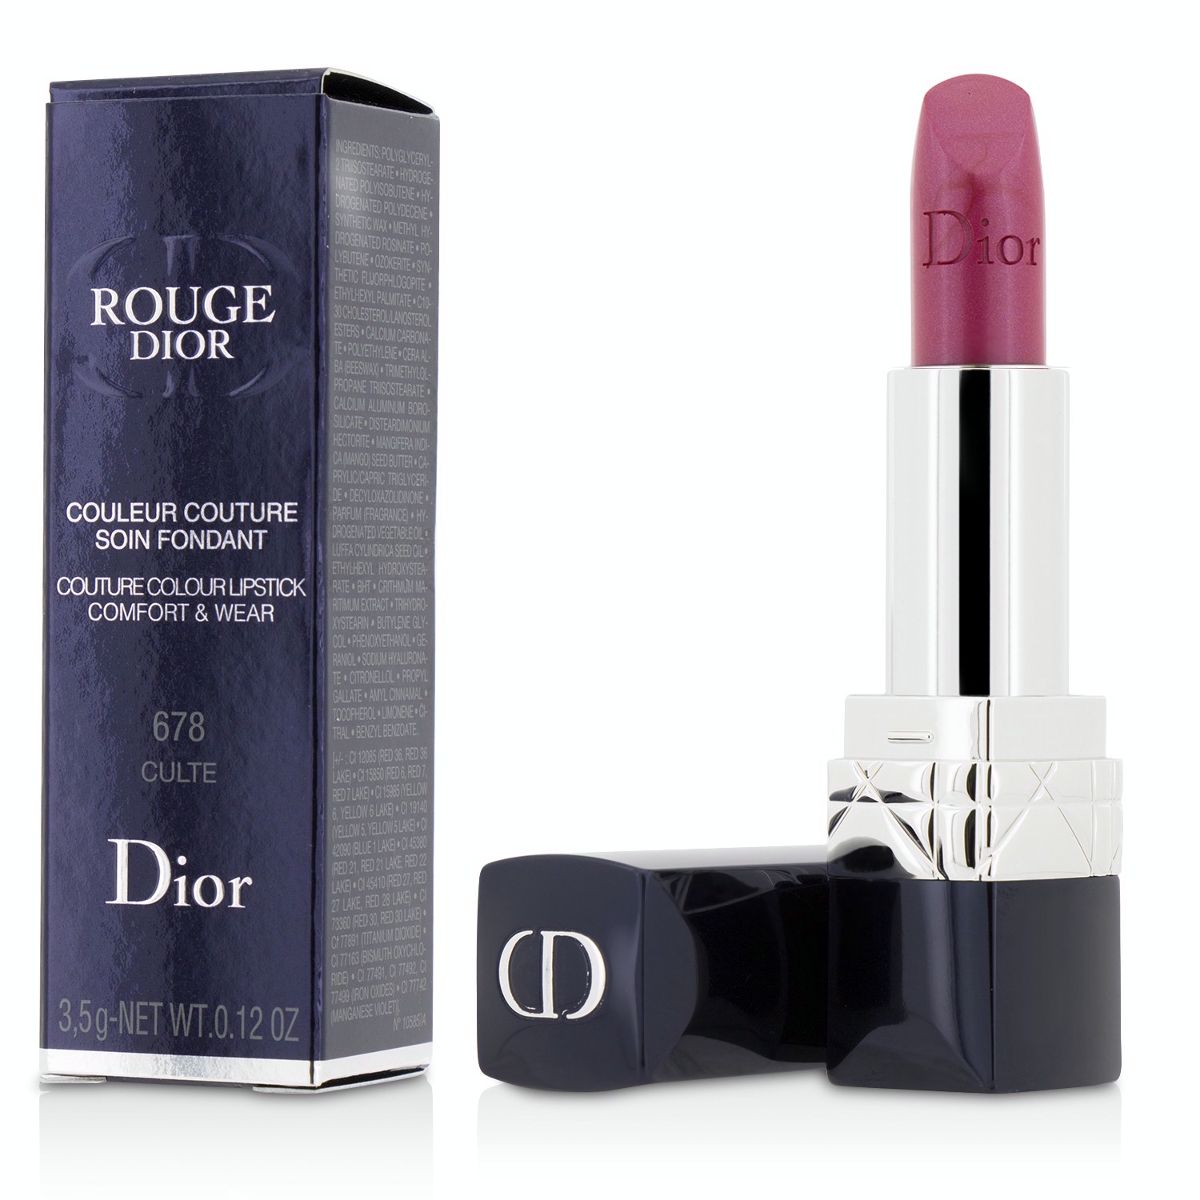 Rouge Dior Couture Colour Comfort  Wear Lipstick - # 678 Culte Christian Dior Image